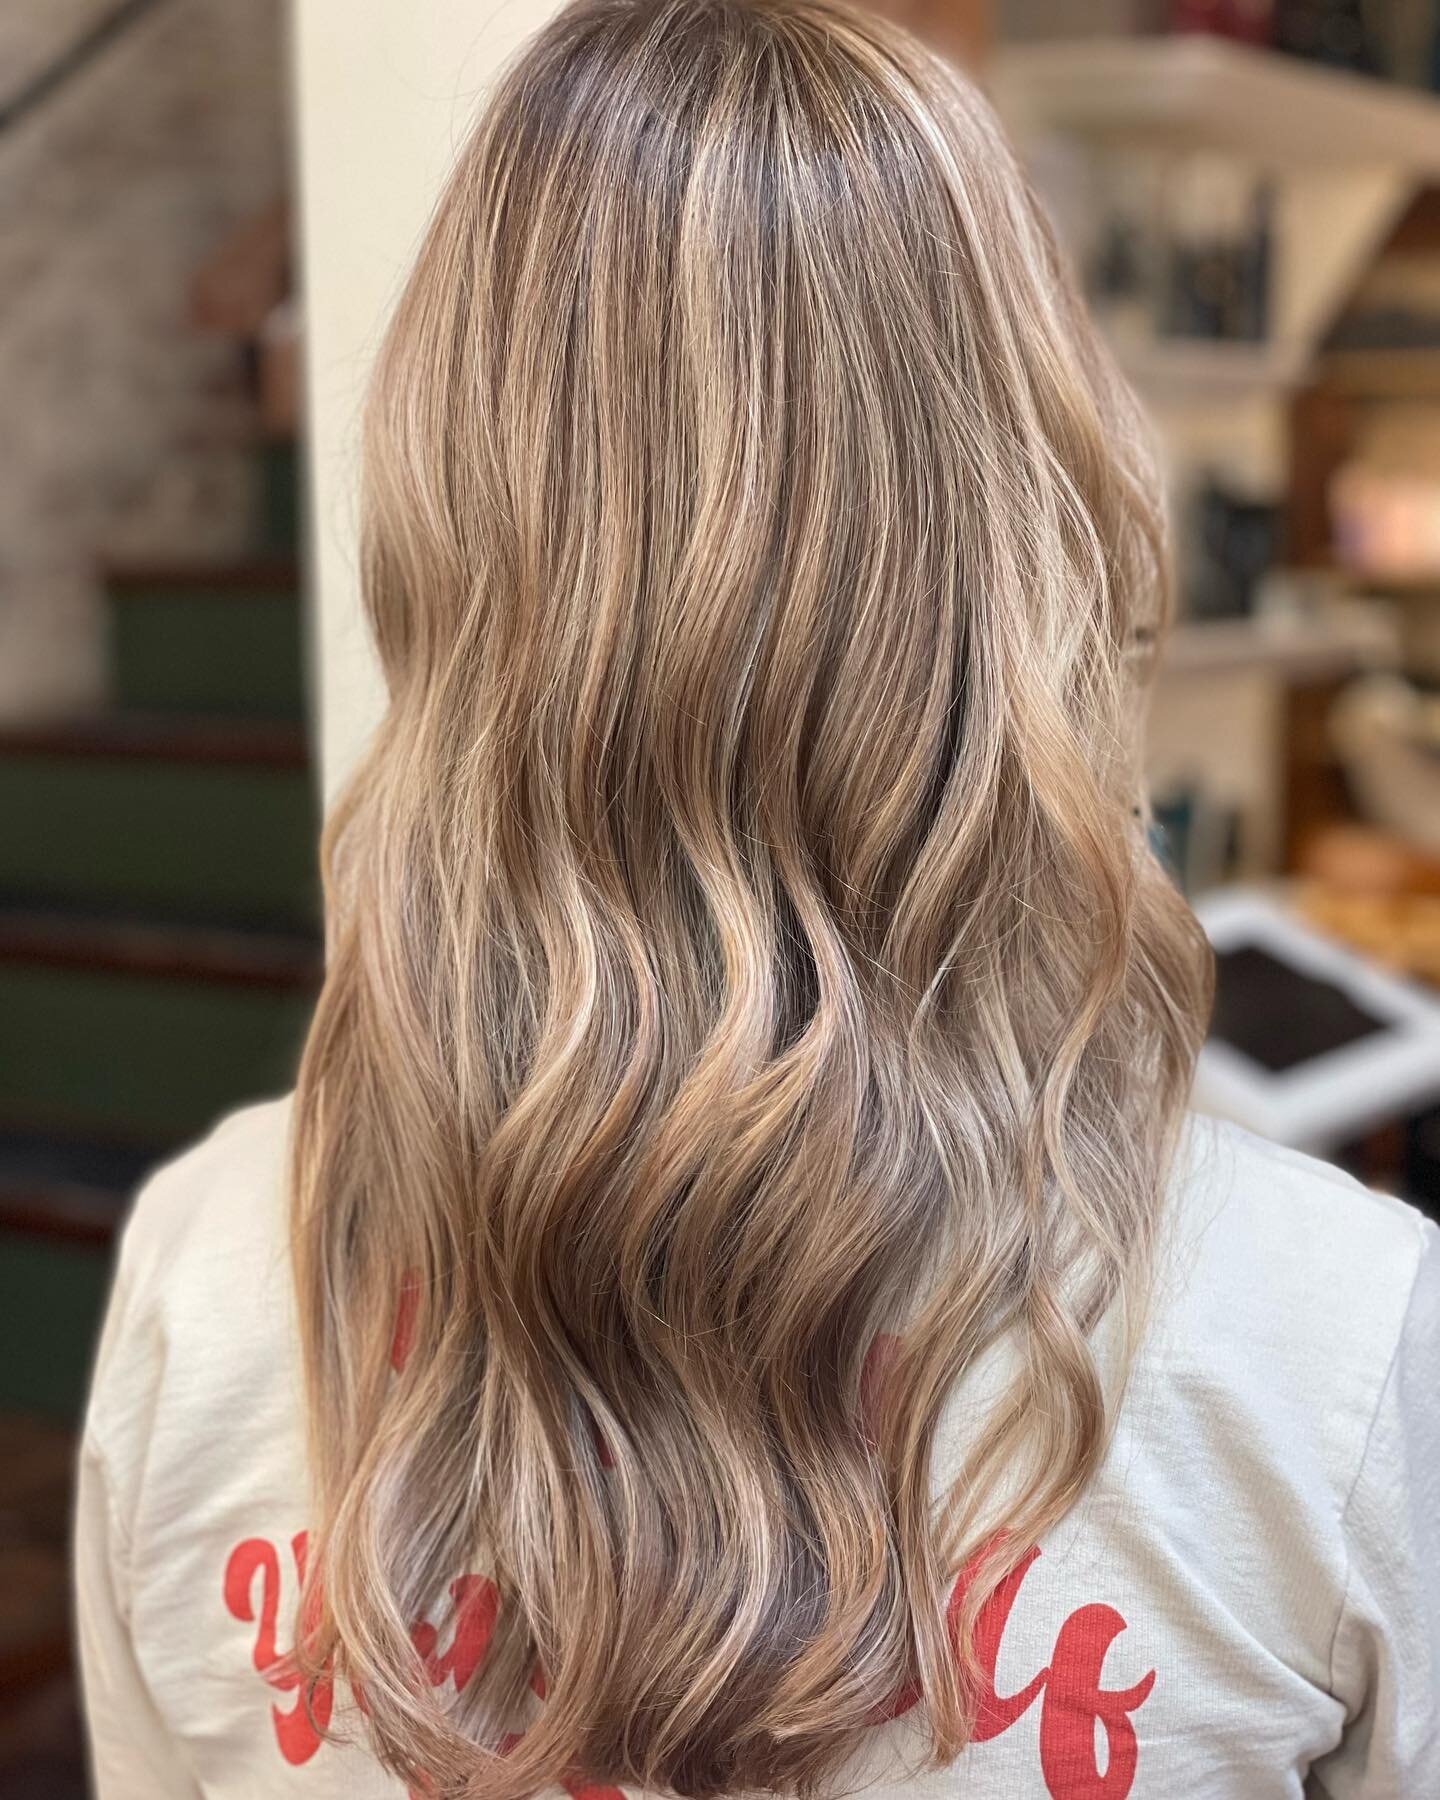 𝑫𝒊𝒎𝒆𝒏𝒔𝒊𝒐𝒏 &mdash;&mdash; Did you know that your blonde pops will look brighter when you have both high and lowlights?

Hair by @hairbykatielucchesi